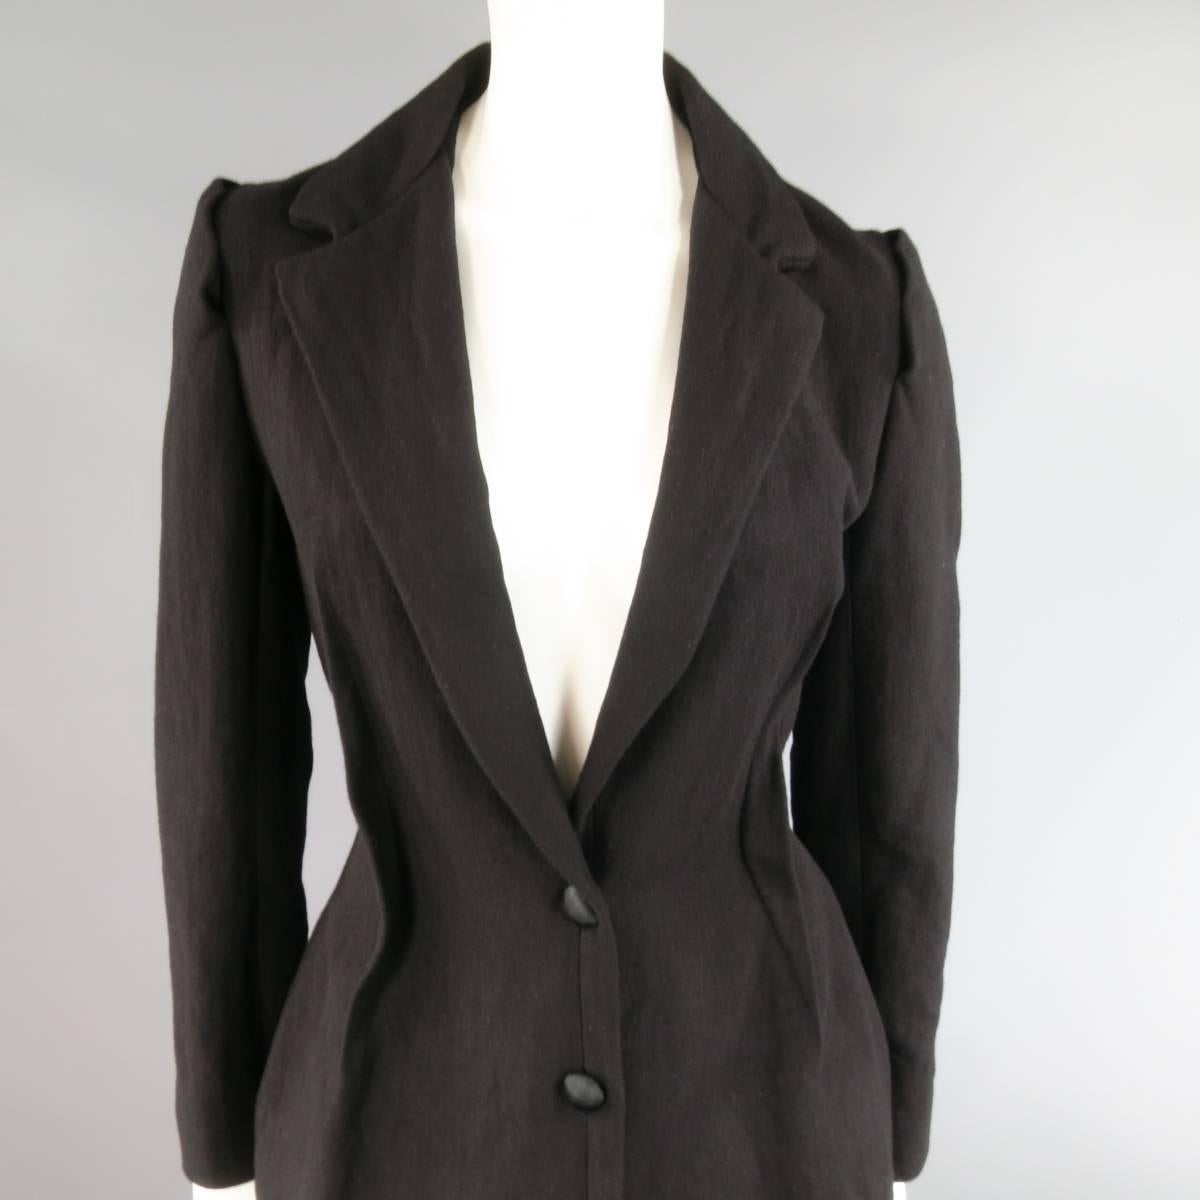 This fabulous LANVIN coat comes in a winkle textured wool, cotton, and woven metal blend and features a a notch lapel, cutout detailed shoulder seams, reverse seam darts, and tailored hourglass silhouette. Circa 2008. Made in France.
 
Excellent